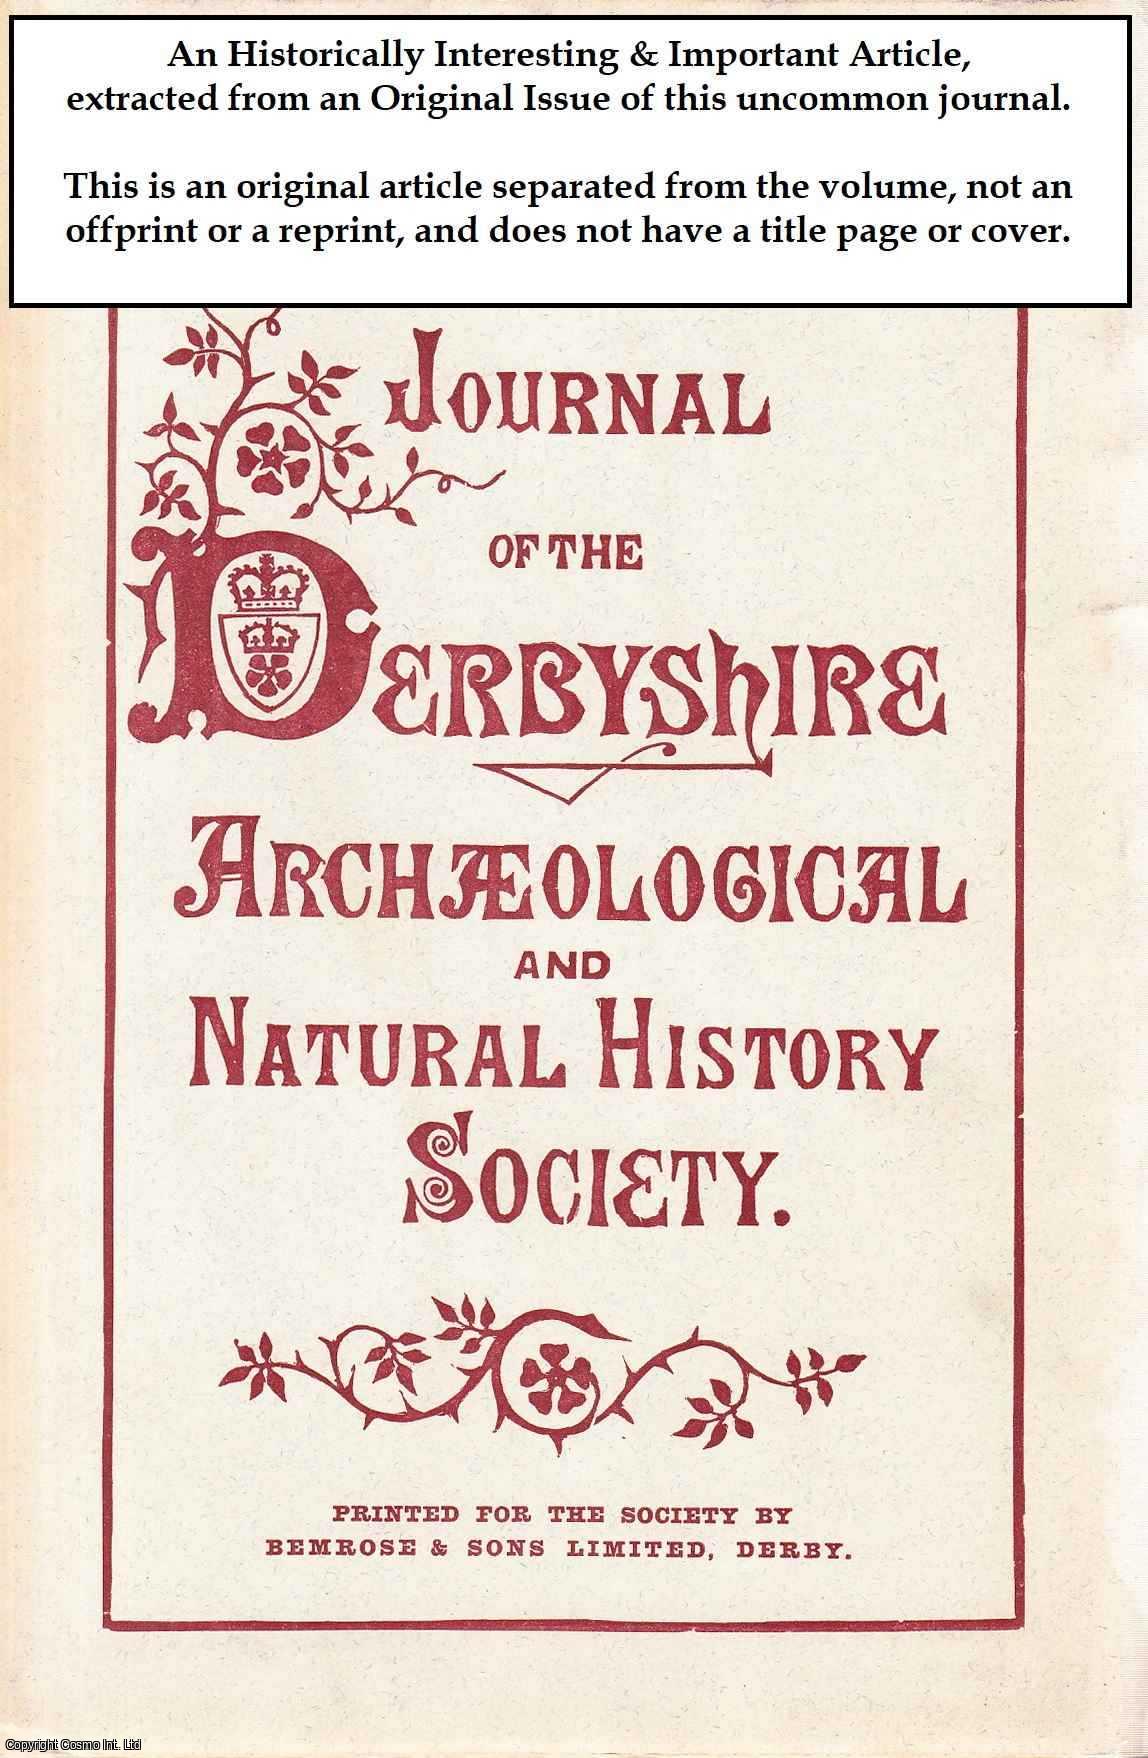 Arthur Cox - Bird Eccentricities in Derbyshire. An original article from the Journal of the Derbyshire Archaeological & Natural History Society, 1886.